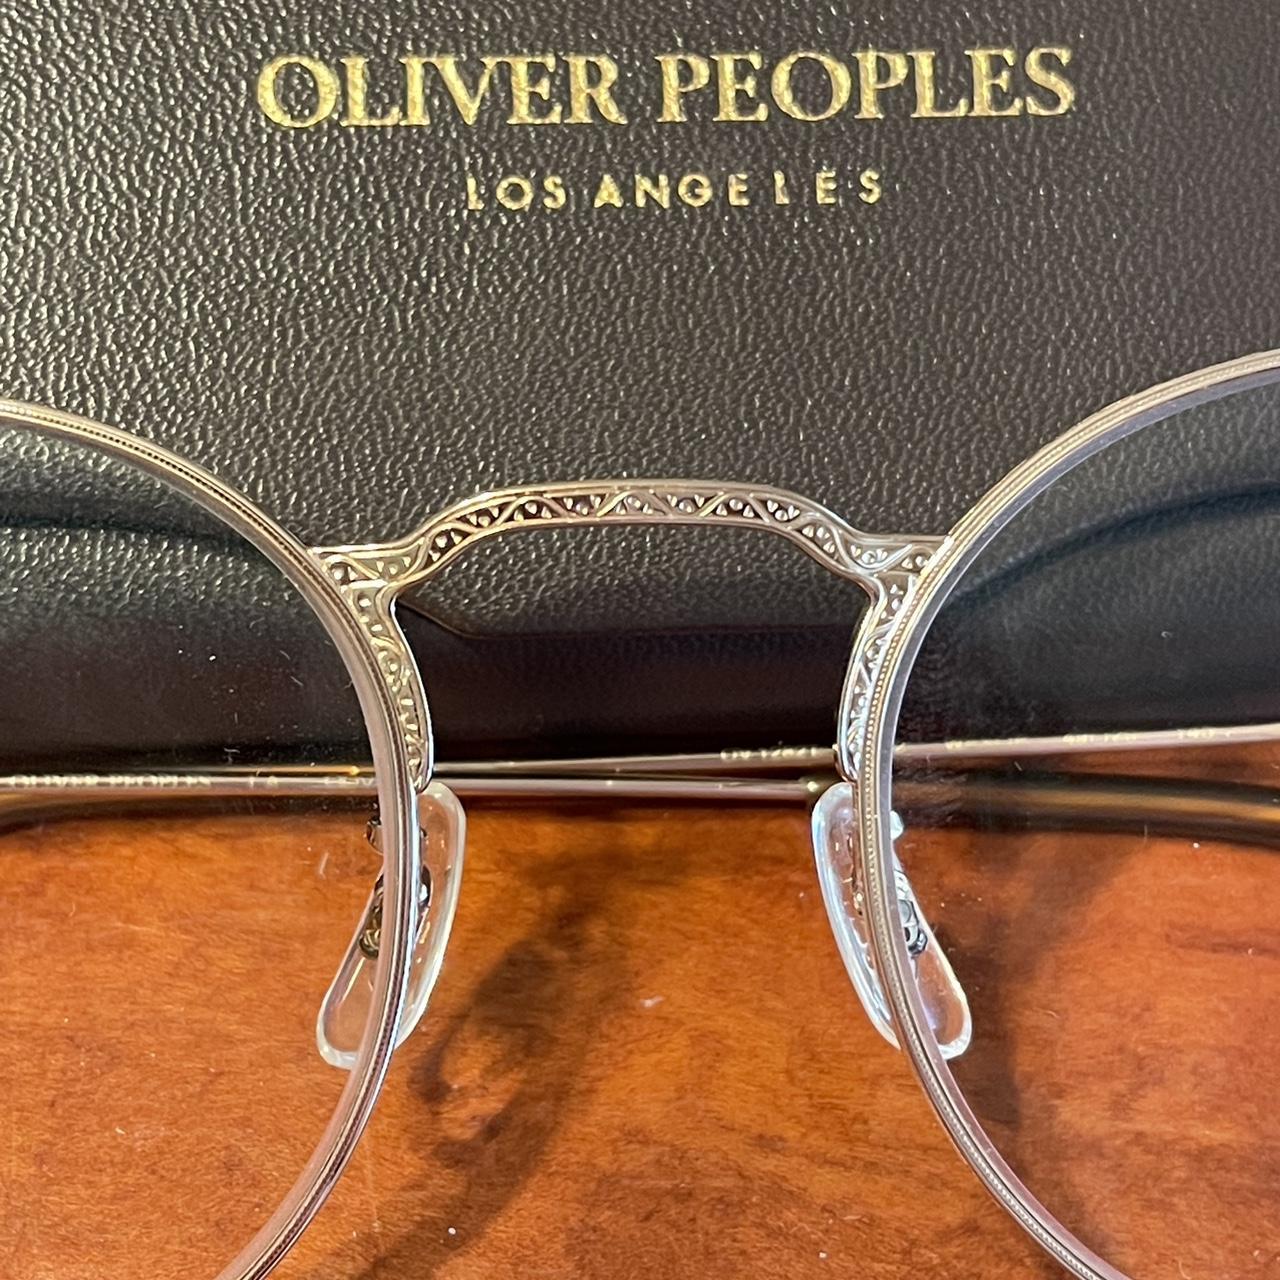 Oliver Peoples Women's Gold Accessory (3)